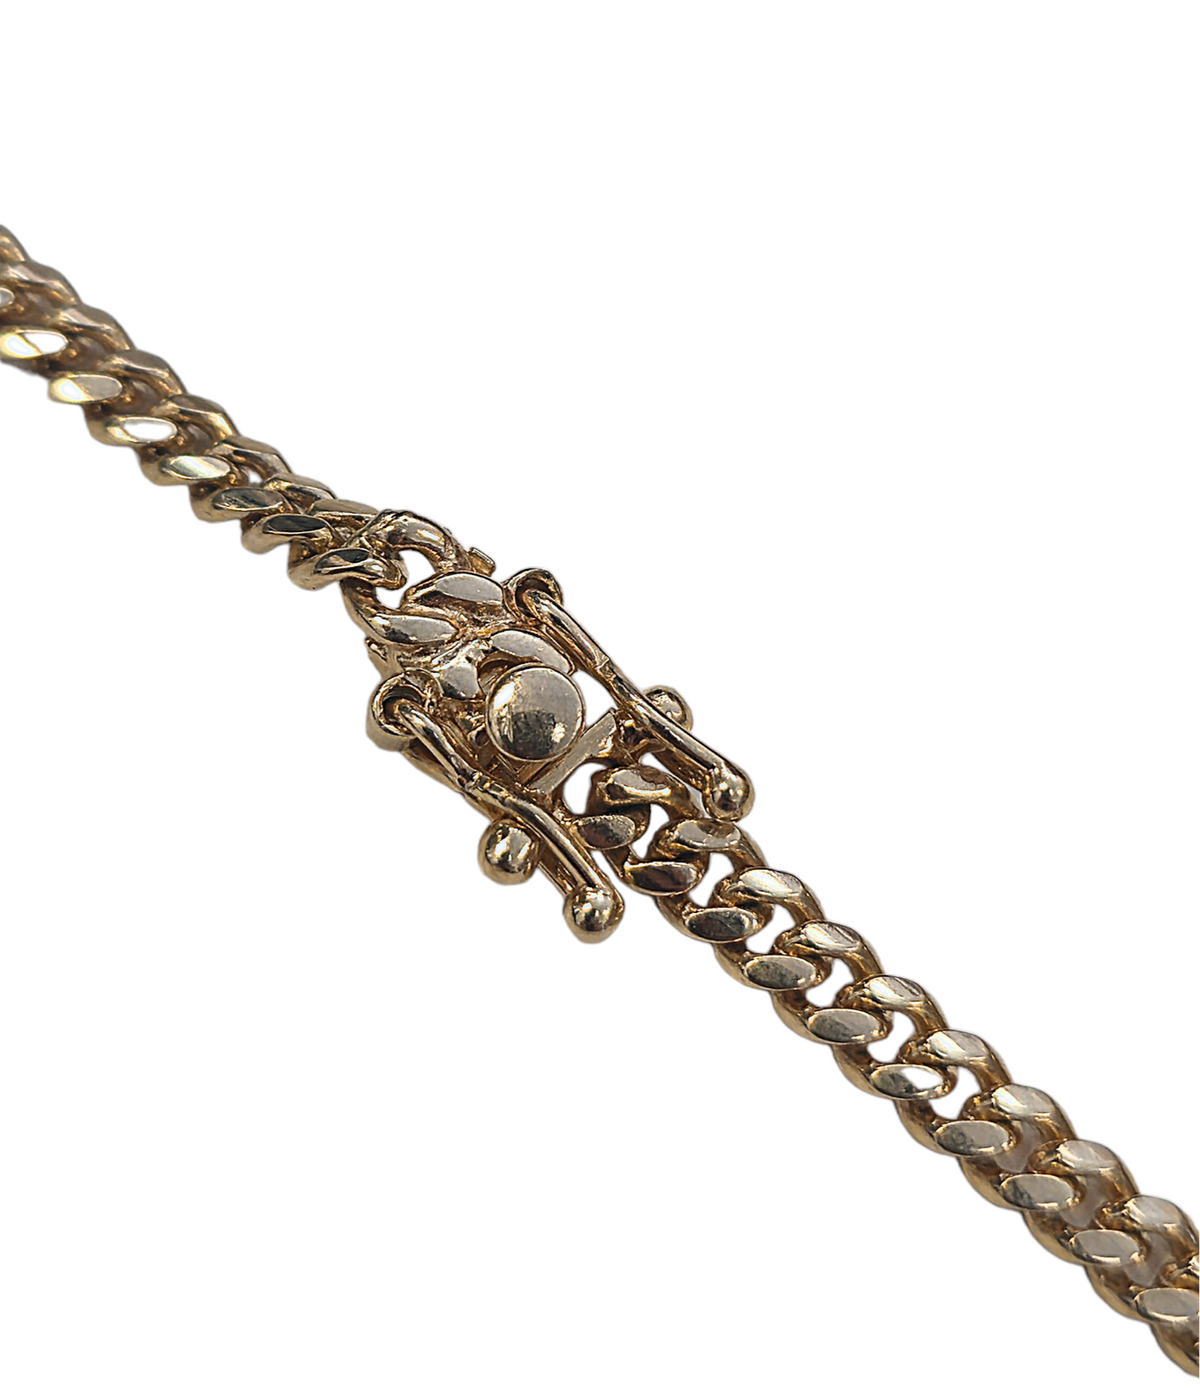 Solid Cuban link style necklace made in solid 14-karat yellow gold 24"